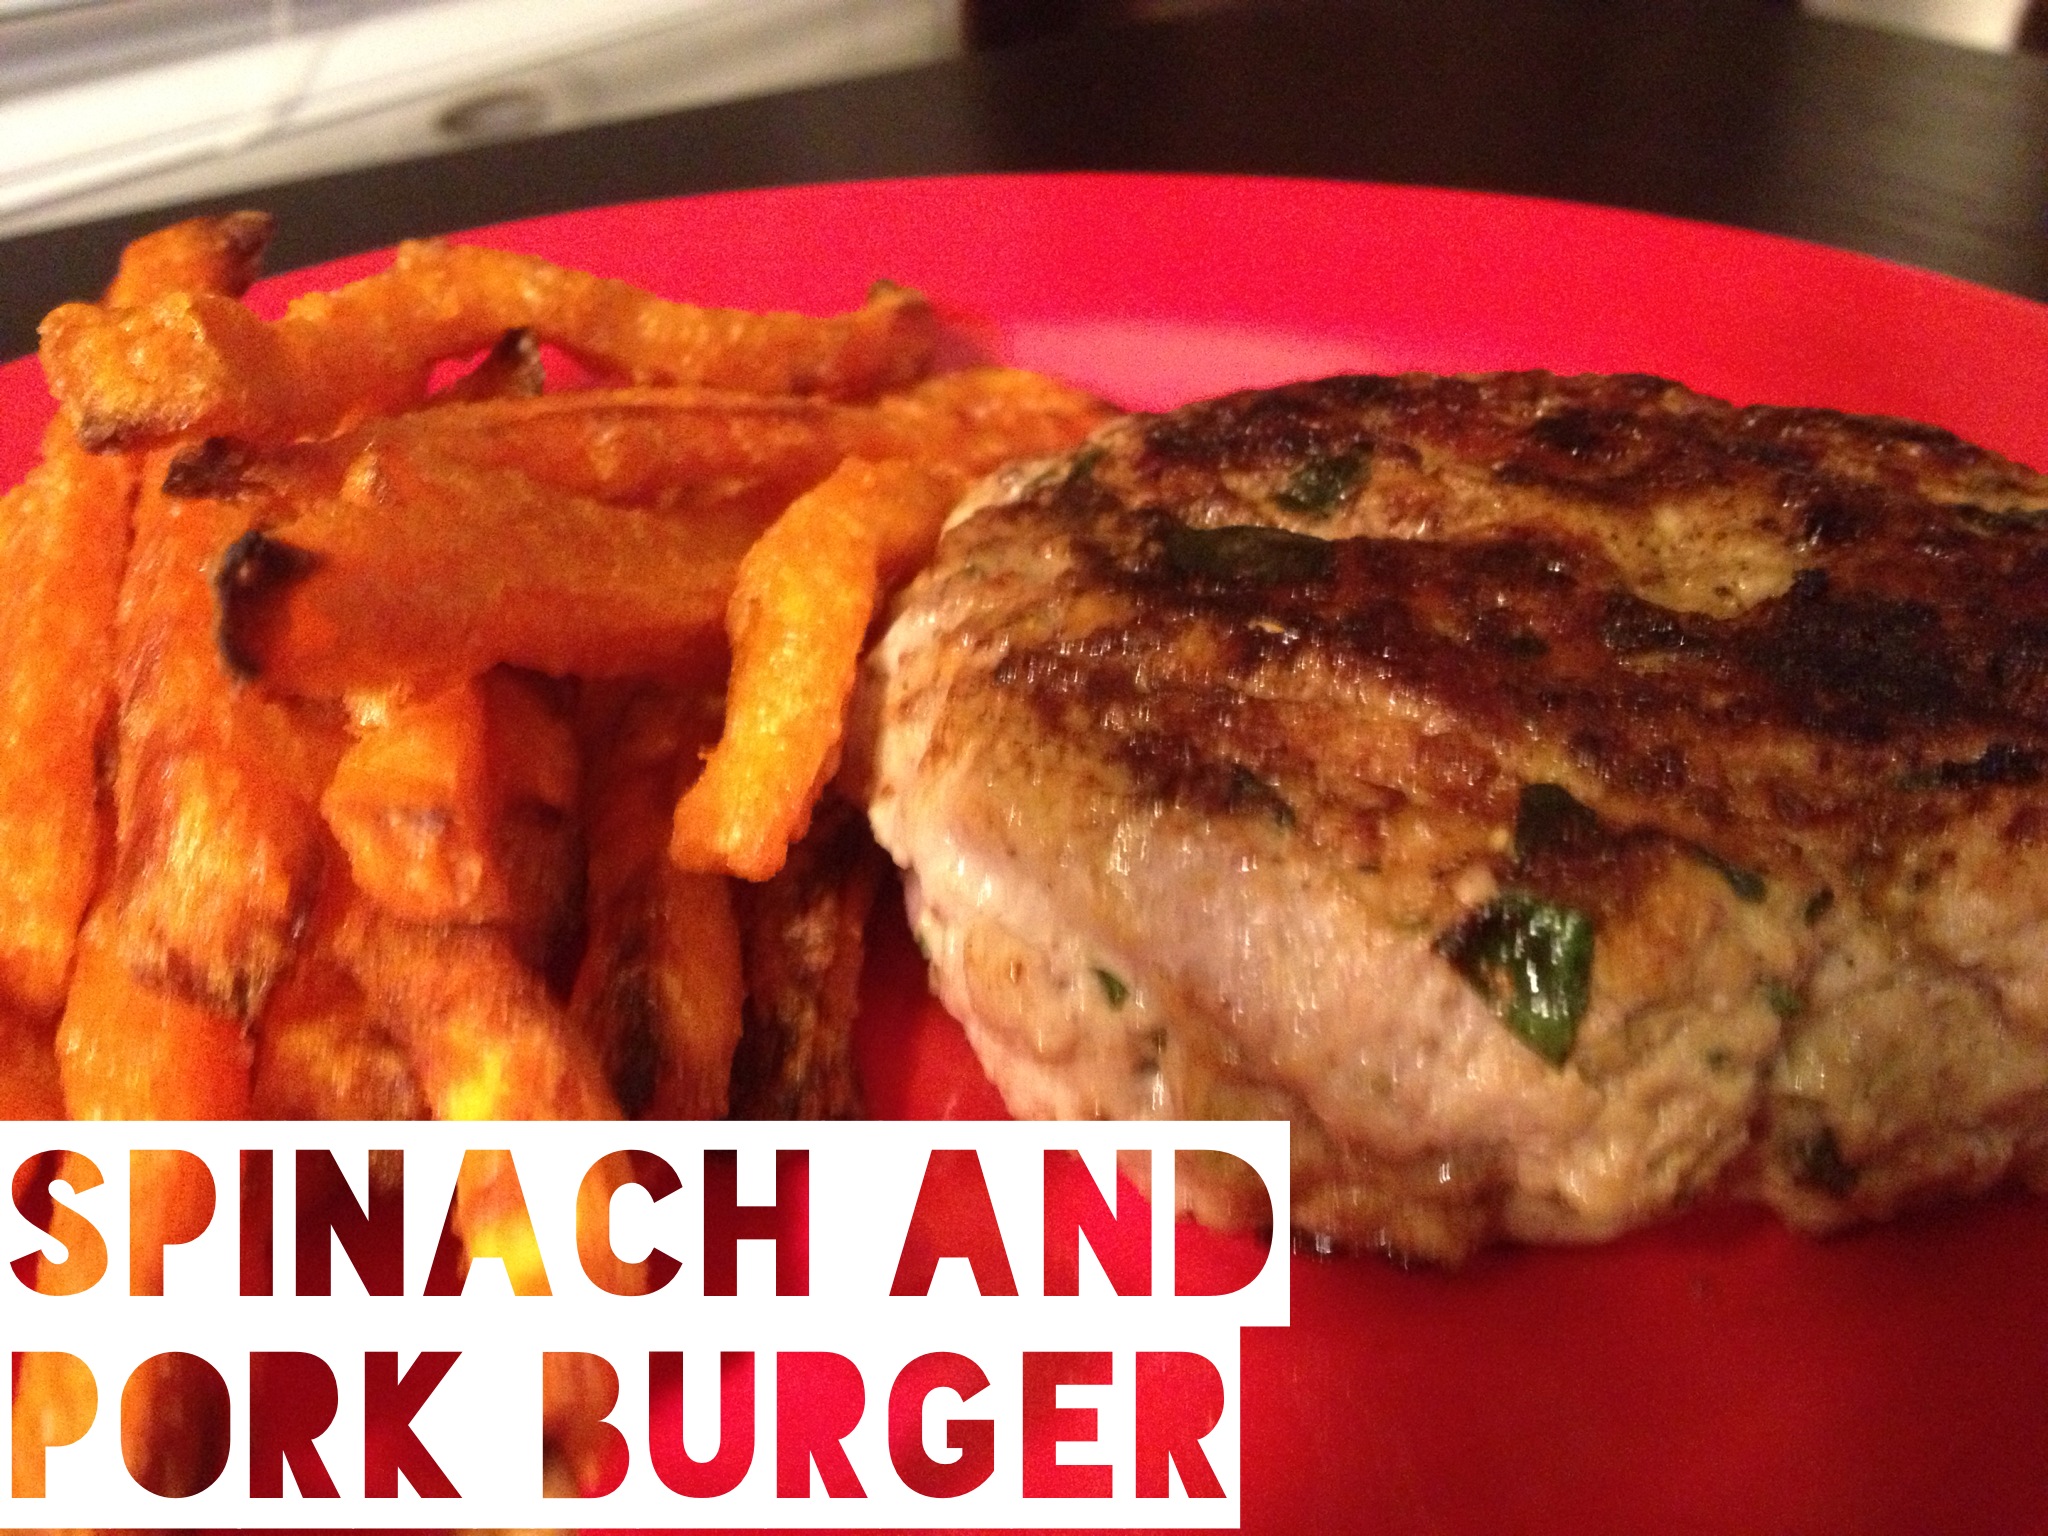 Don’t Cave In: Spinach and Pork Burgers